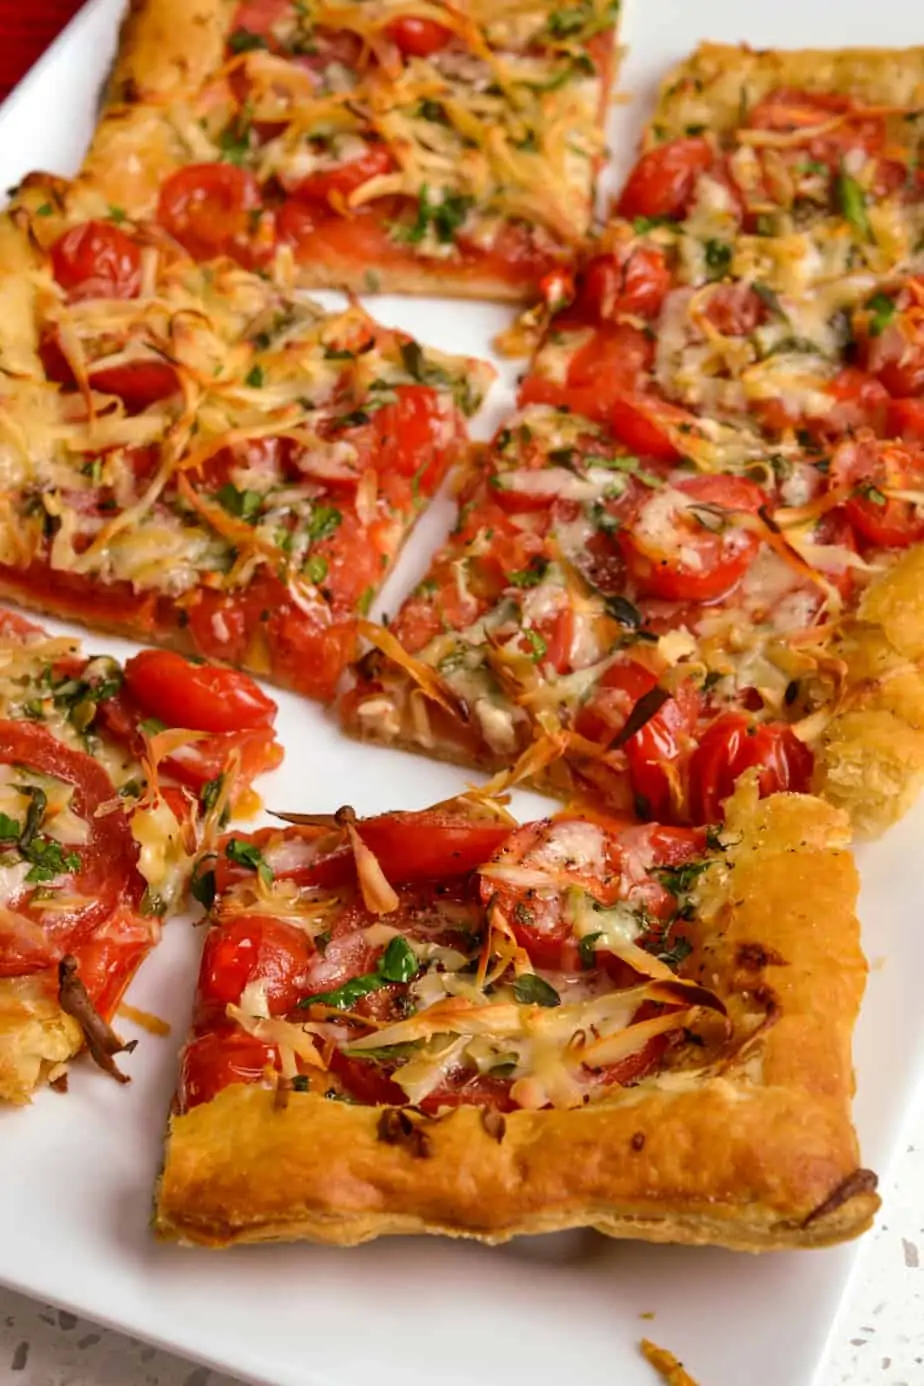 This delicious tomato tart dish takes just a few minutes to assemble, looks gorgeous, and tastes better than any five-star restaurant.